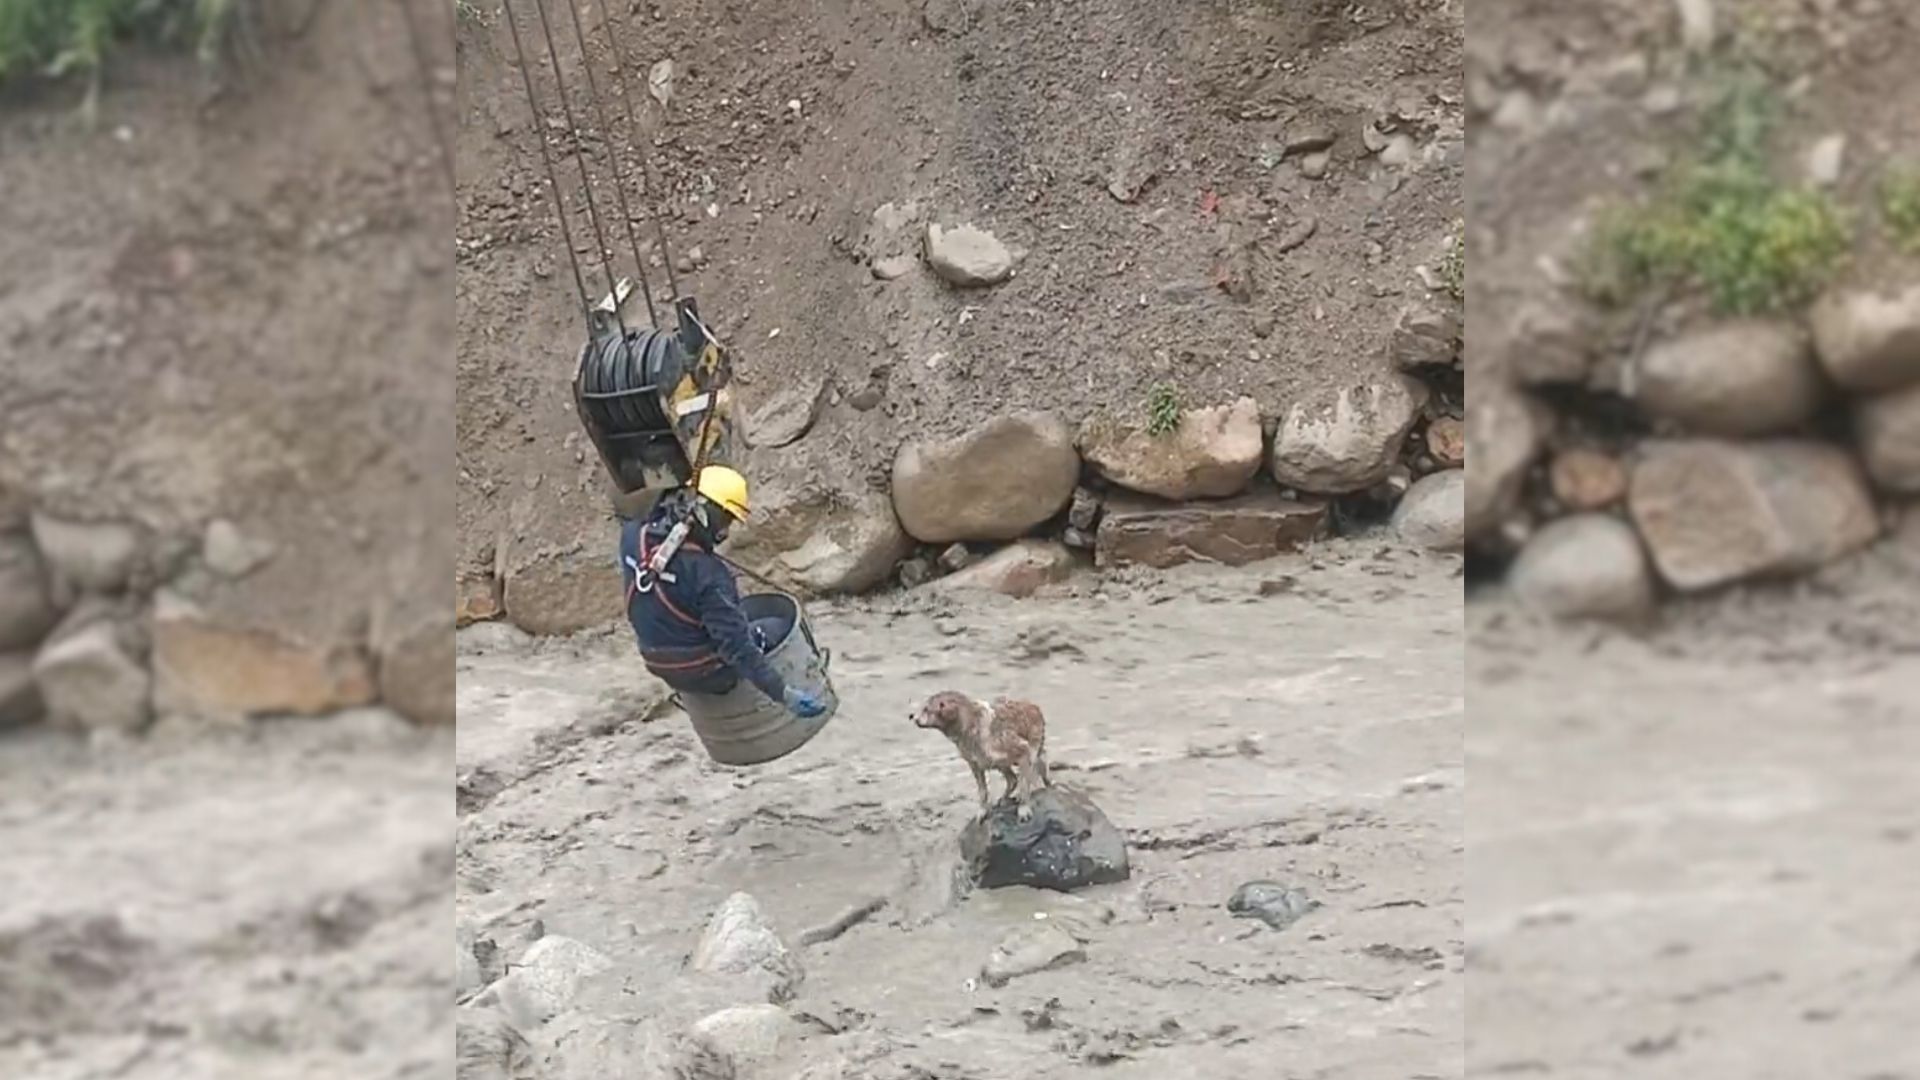 Dog Stuck In A Raging River Couldn’t Move Until Brave Construction Workers Came To Help